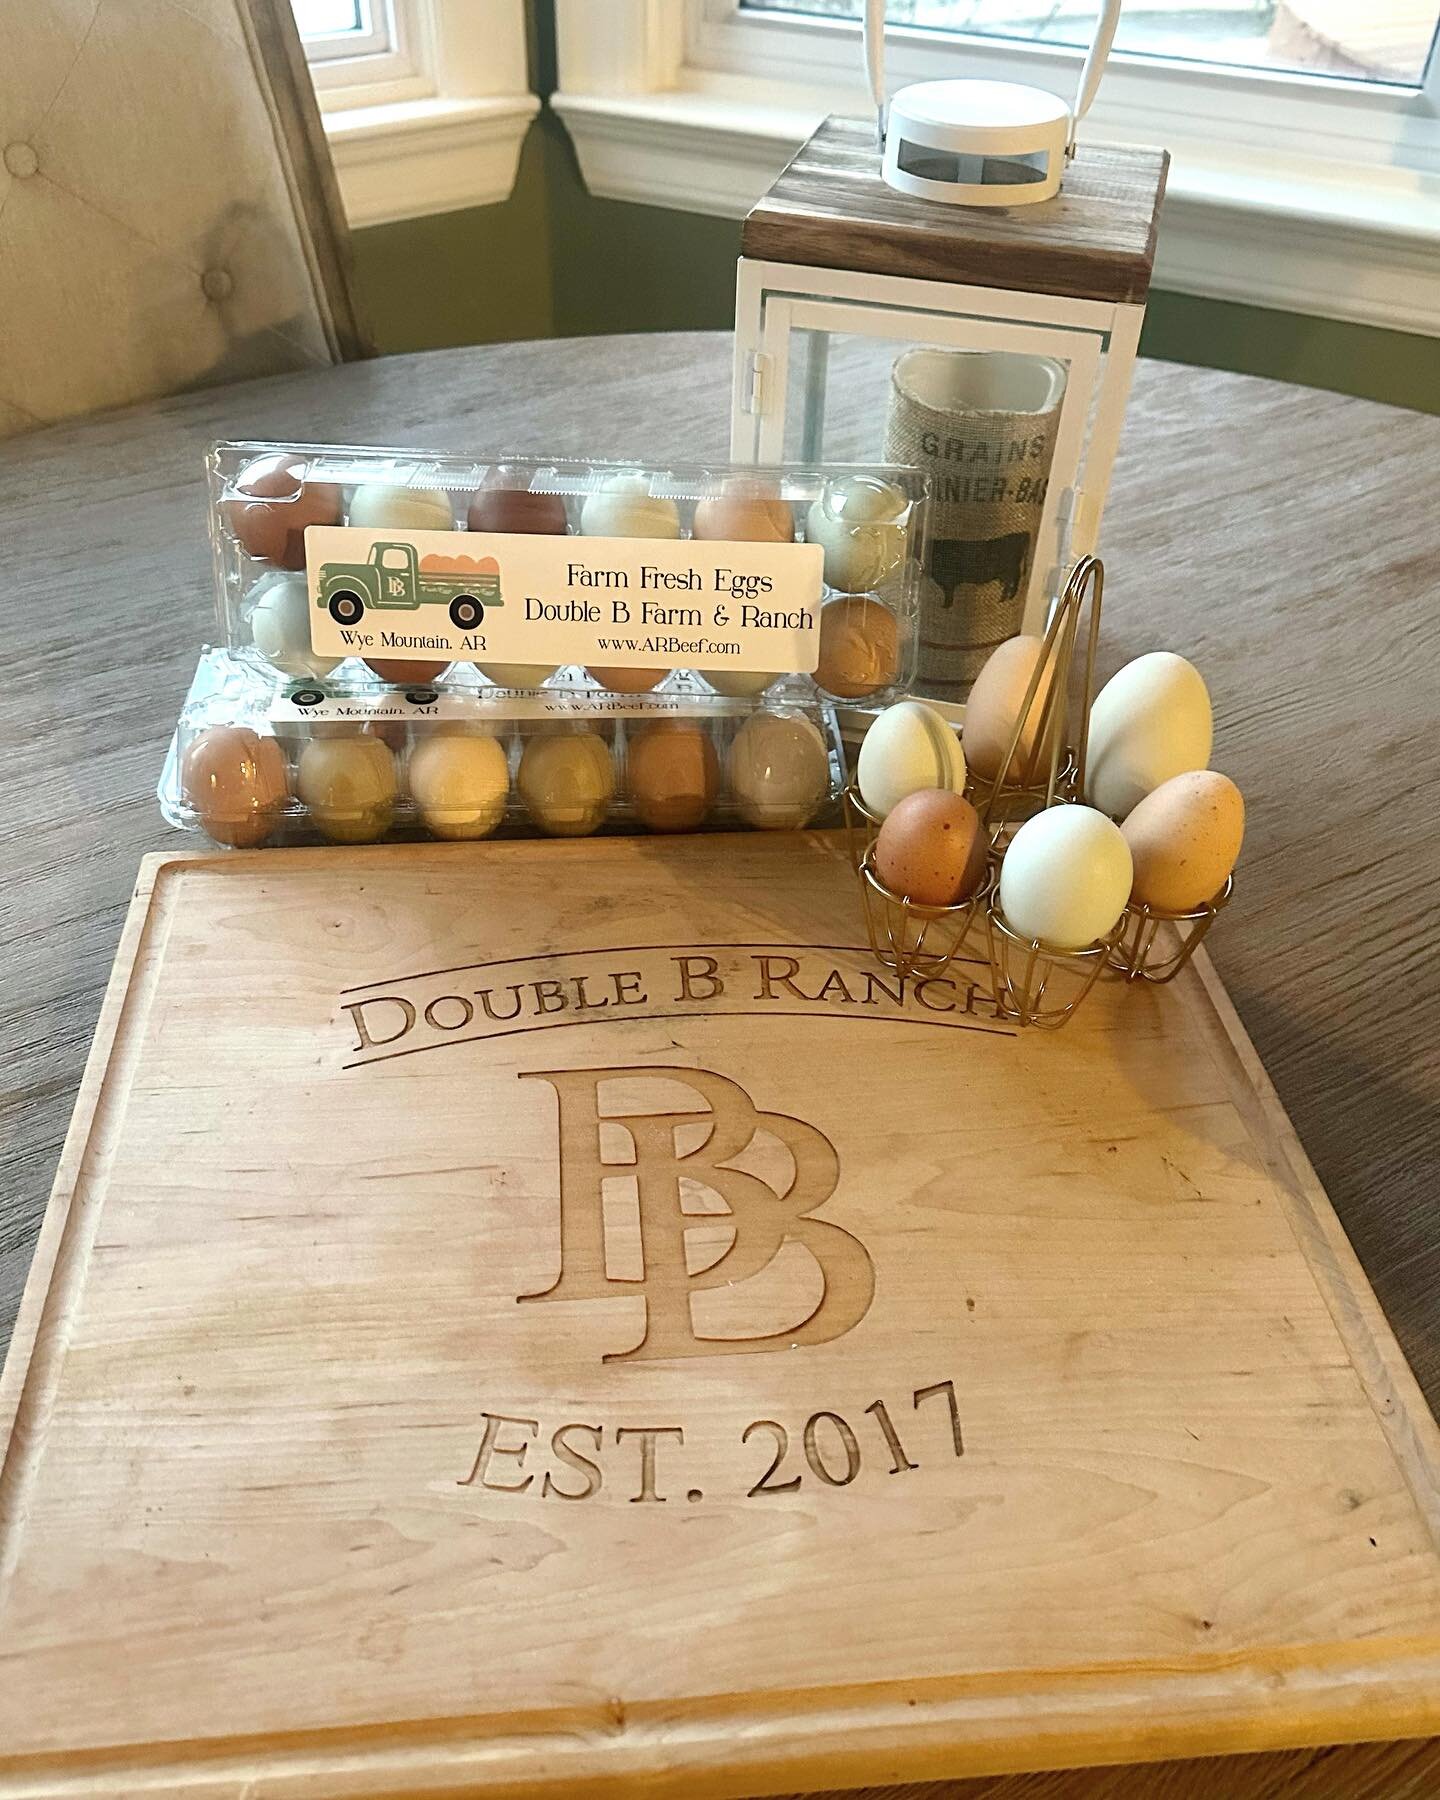 🌸 Spring time and extra daylight makes the chickens happy!

🐥
🐥

🥚 We have Farm Fresh eggs in stock; and in honor of Spring they are $5 a dozen this week only!

Our Eggs sell out fast, place your order online to reserve yours for Saturday Deliver